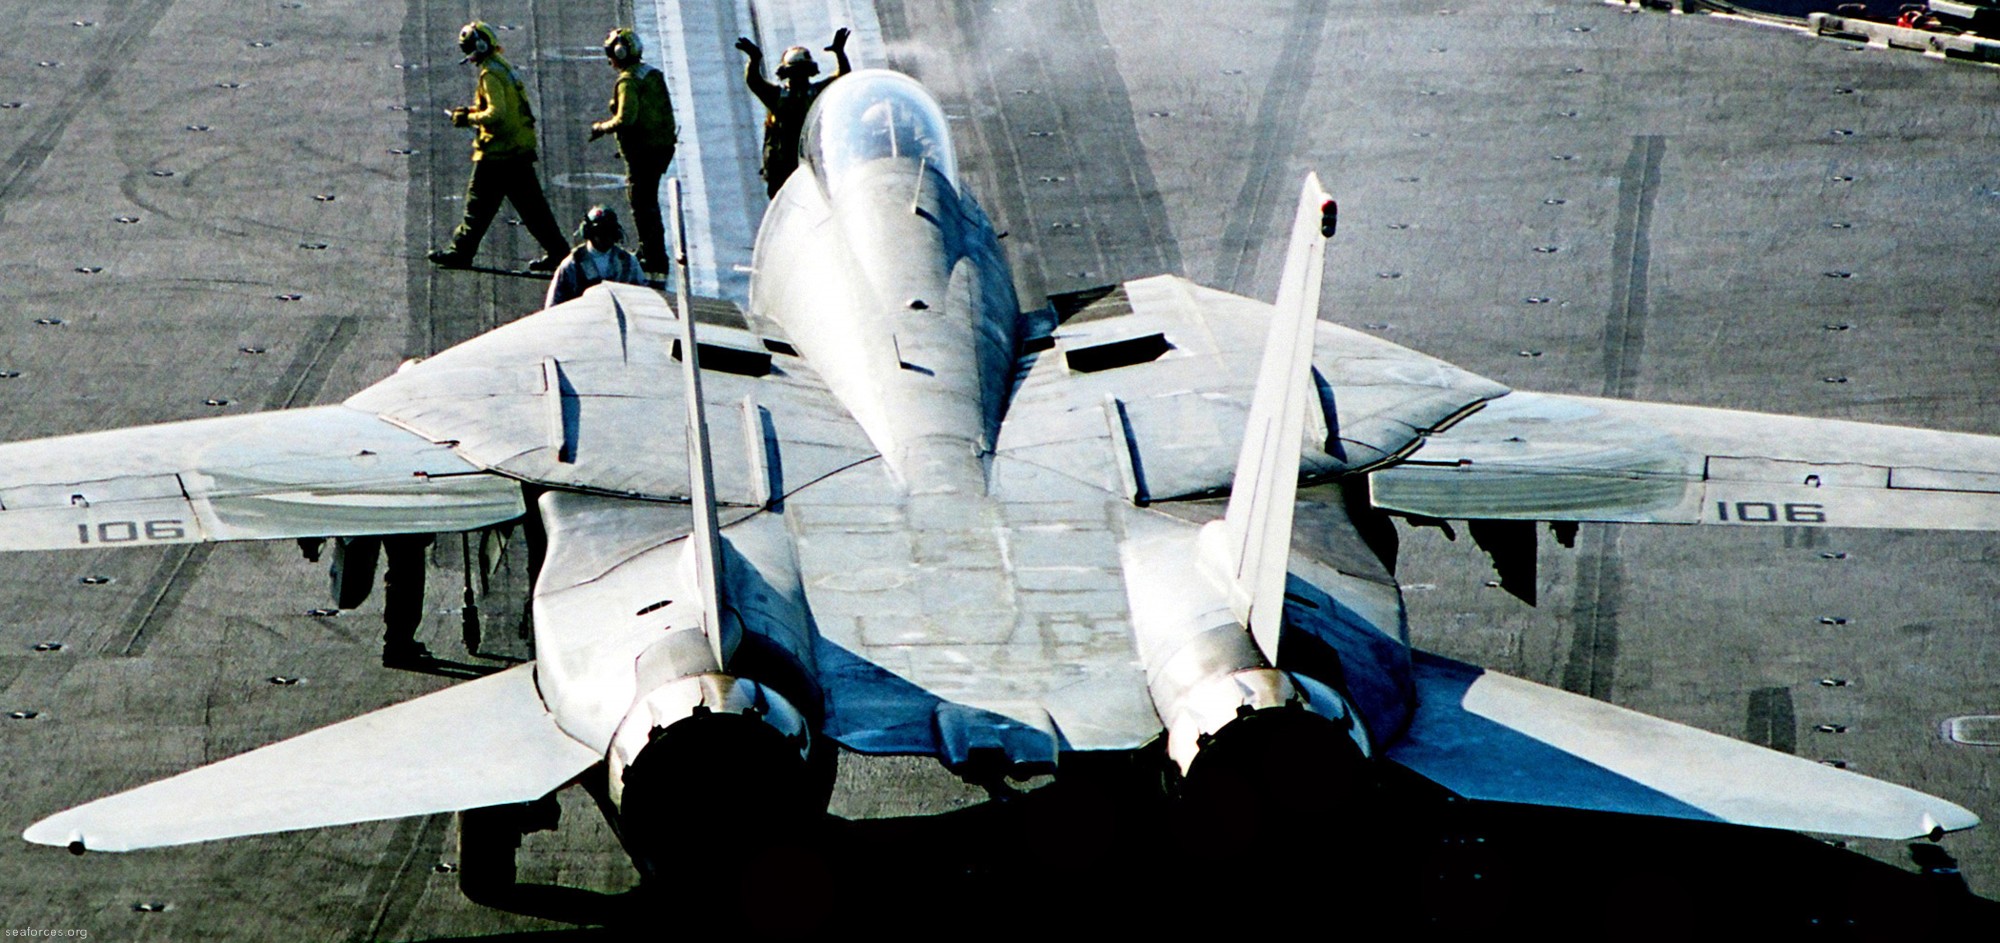 vf-31 tomcatters fighter squadron navy f-14d tomcat cvw-14 uss abraham lincoln cvn-72 102